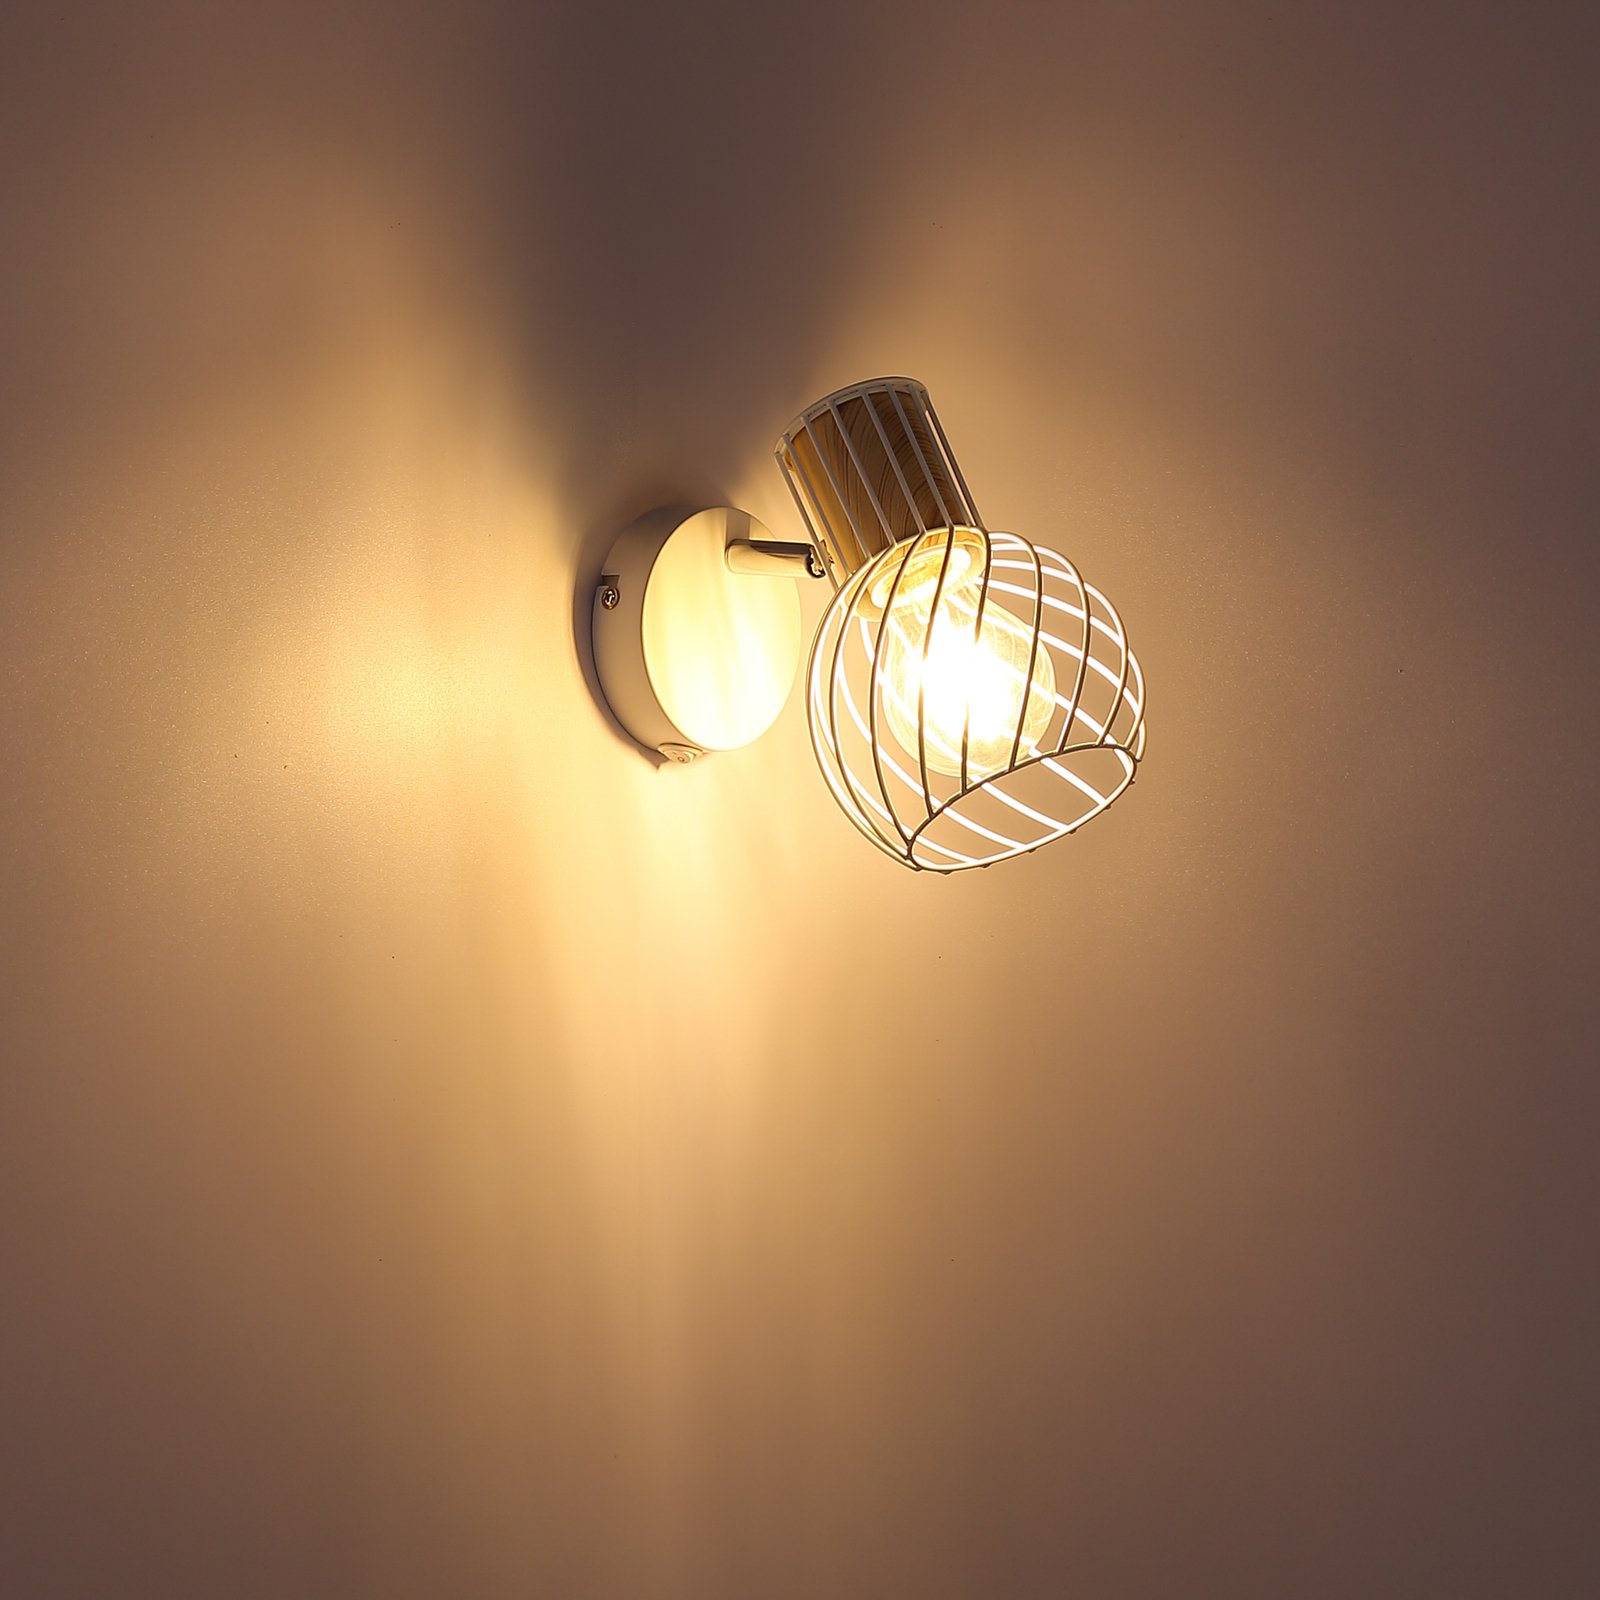 Luise wall light in white, wooden look socket